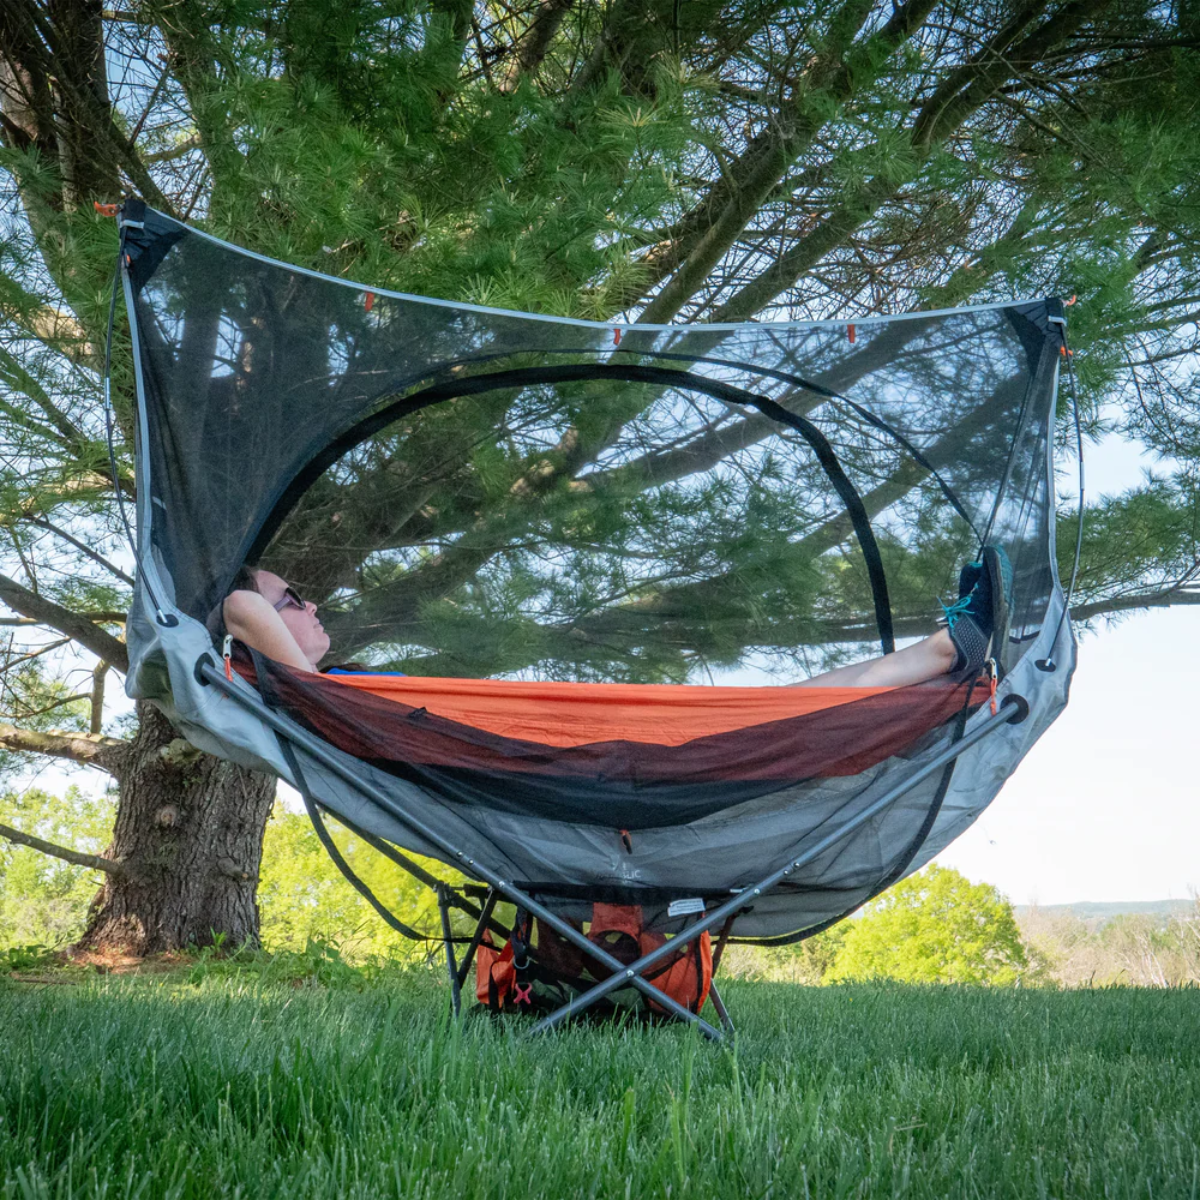 26. Experience Bliss Together: Unwind in Style with a Unique Outdoor Hammock for Two